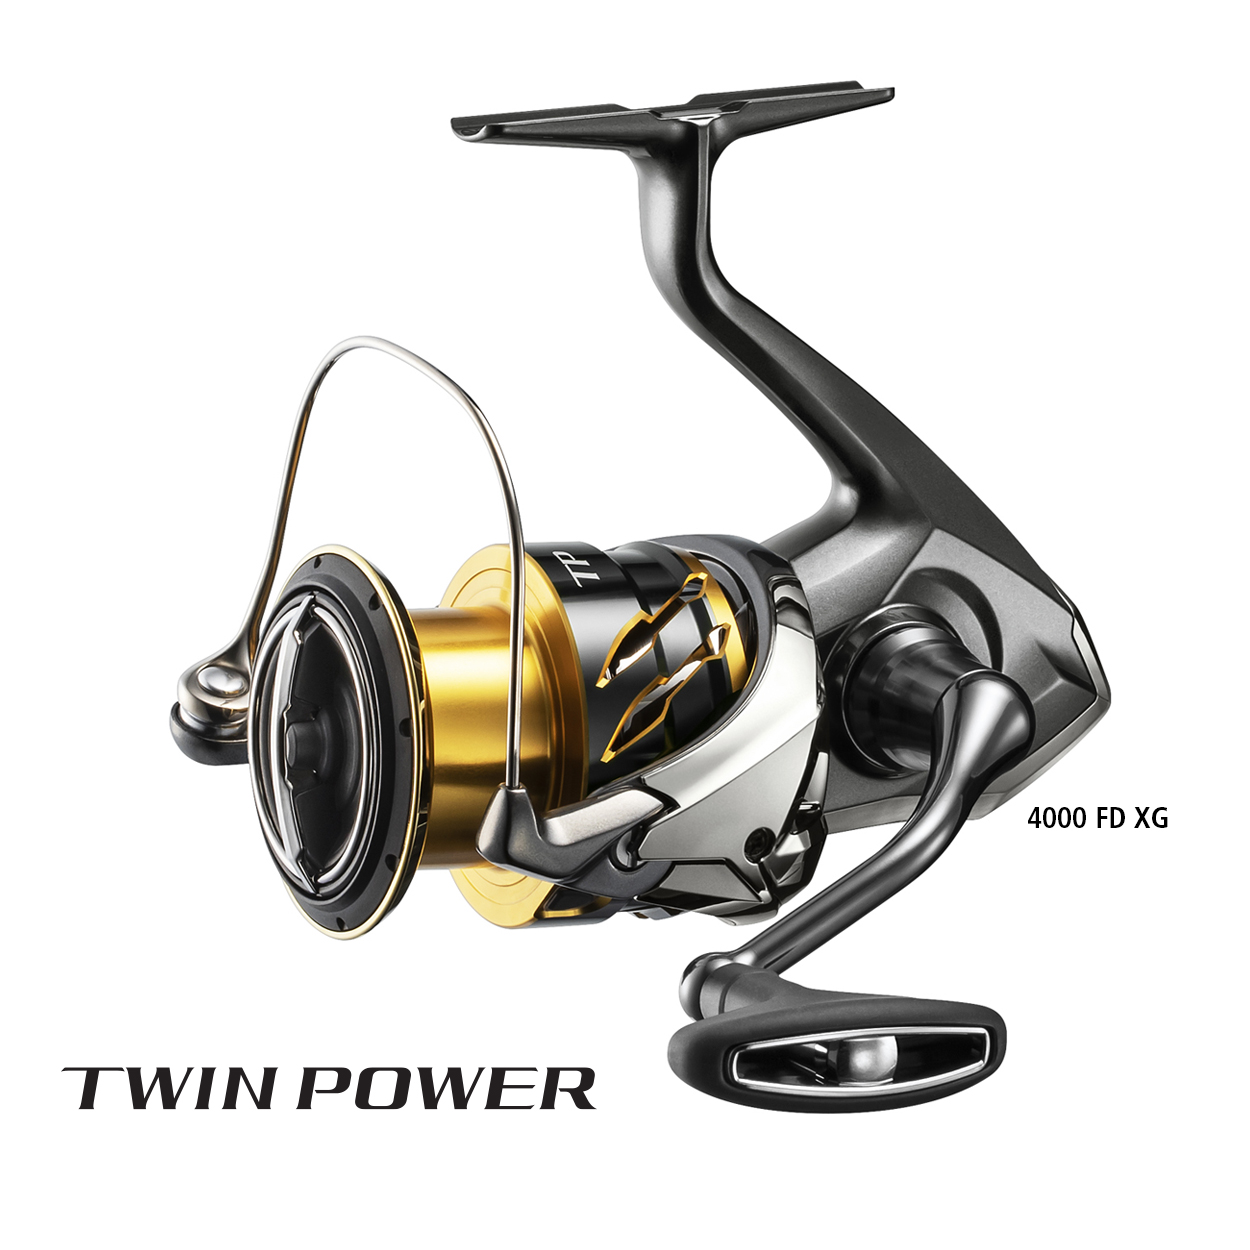 Shimano Twin Power FD Spin Reels with Free Shipping & Neoprene Reel Bag -  Compleat Angler Ringwood